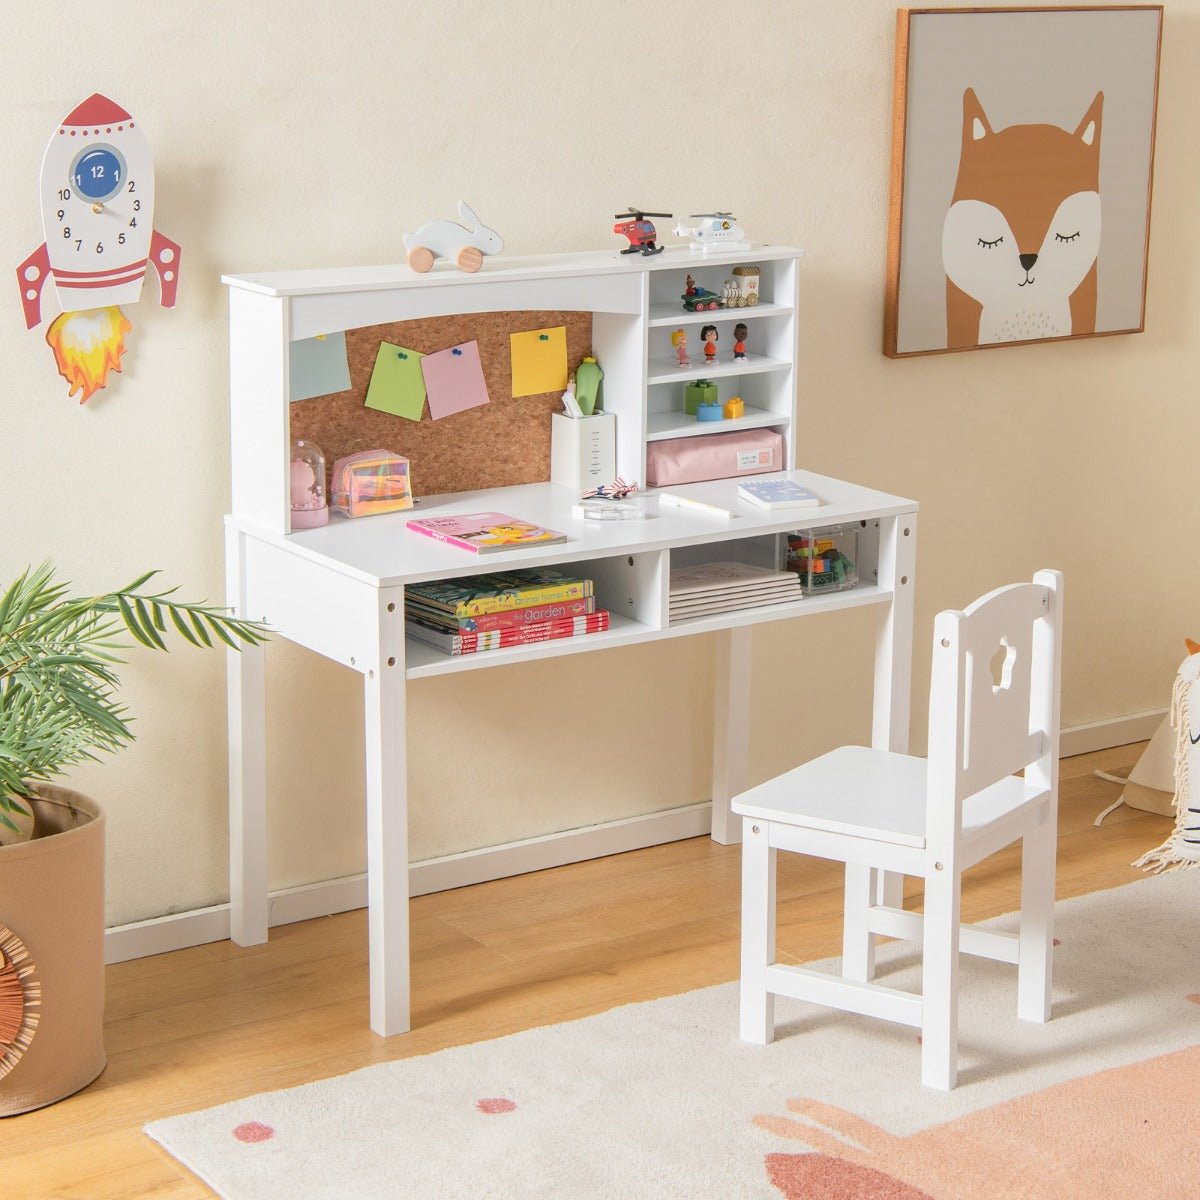 Buy the Ultimate Kids Desk and Chair Set for Creative Learning